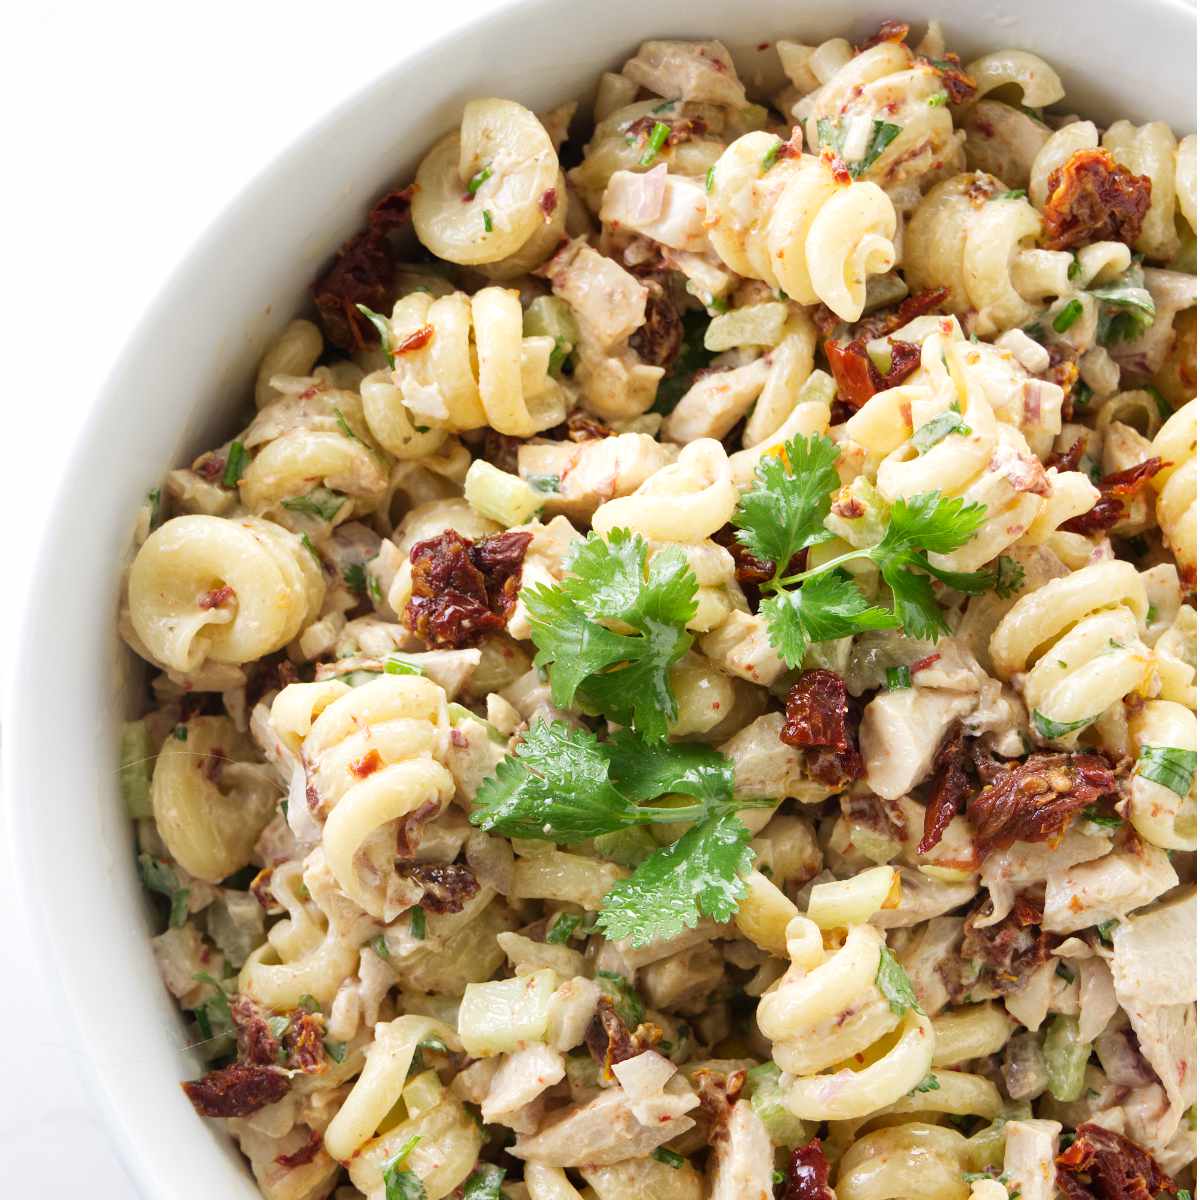 A dish filled with chicken chipotle pasta salad.